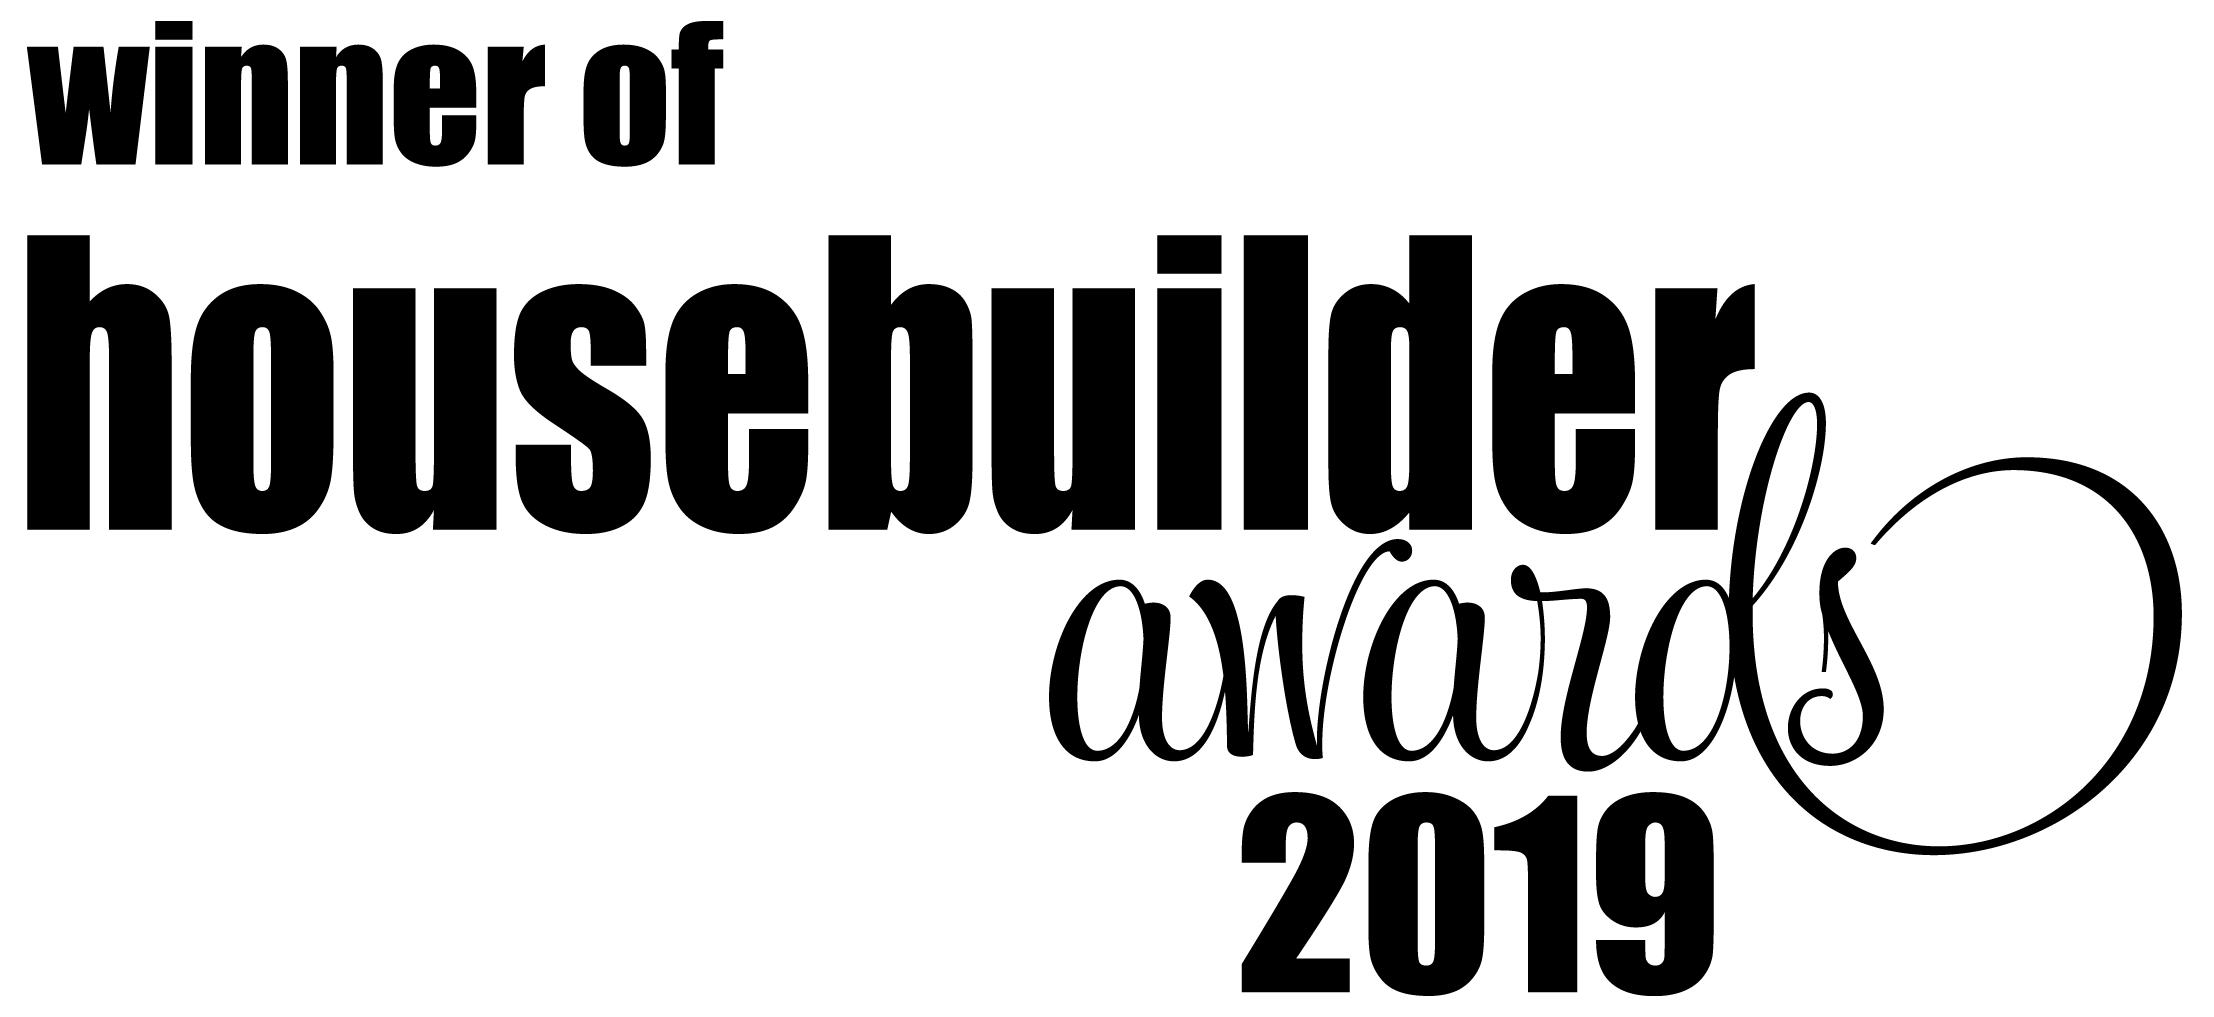 Large Housebuilder of the year 2019